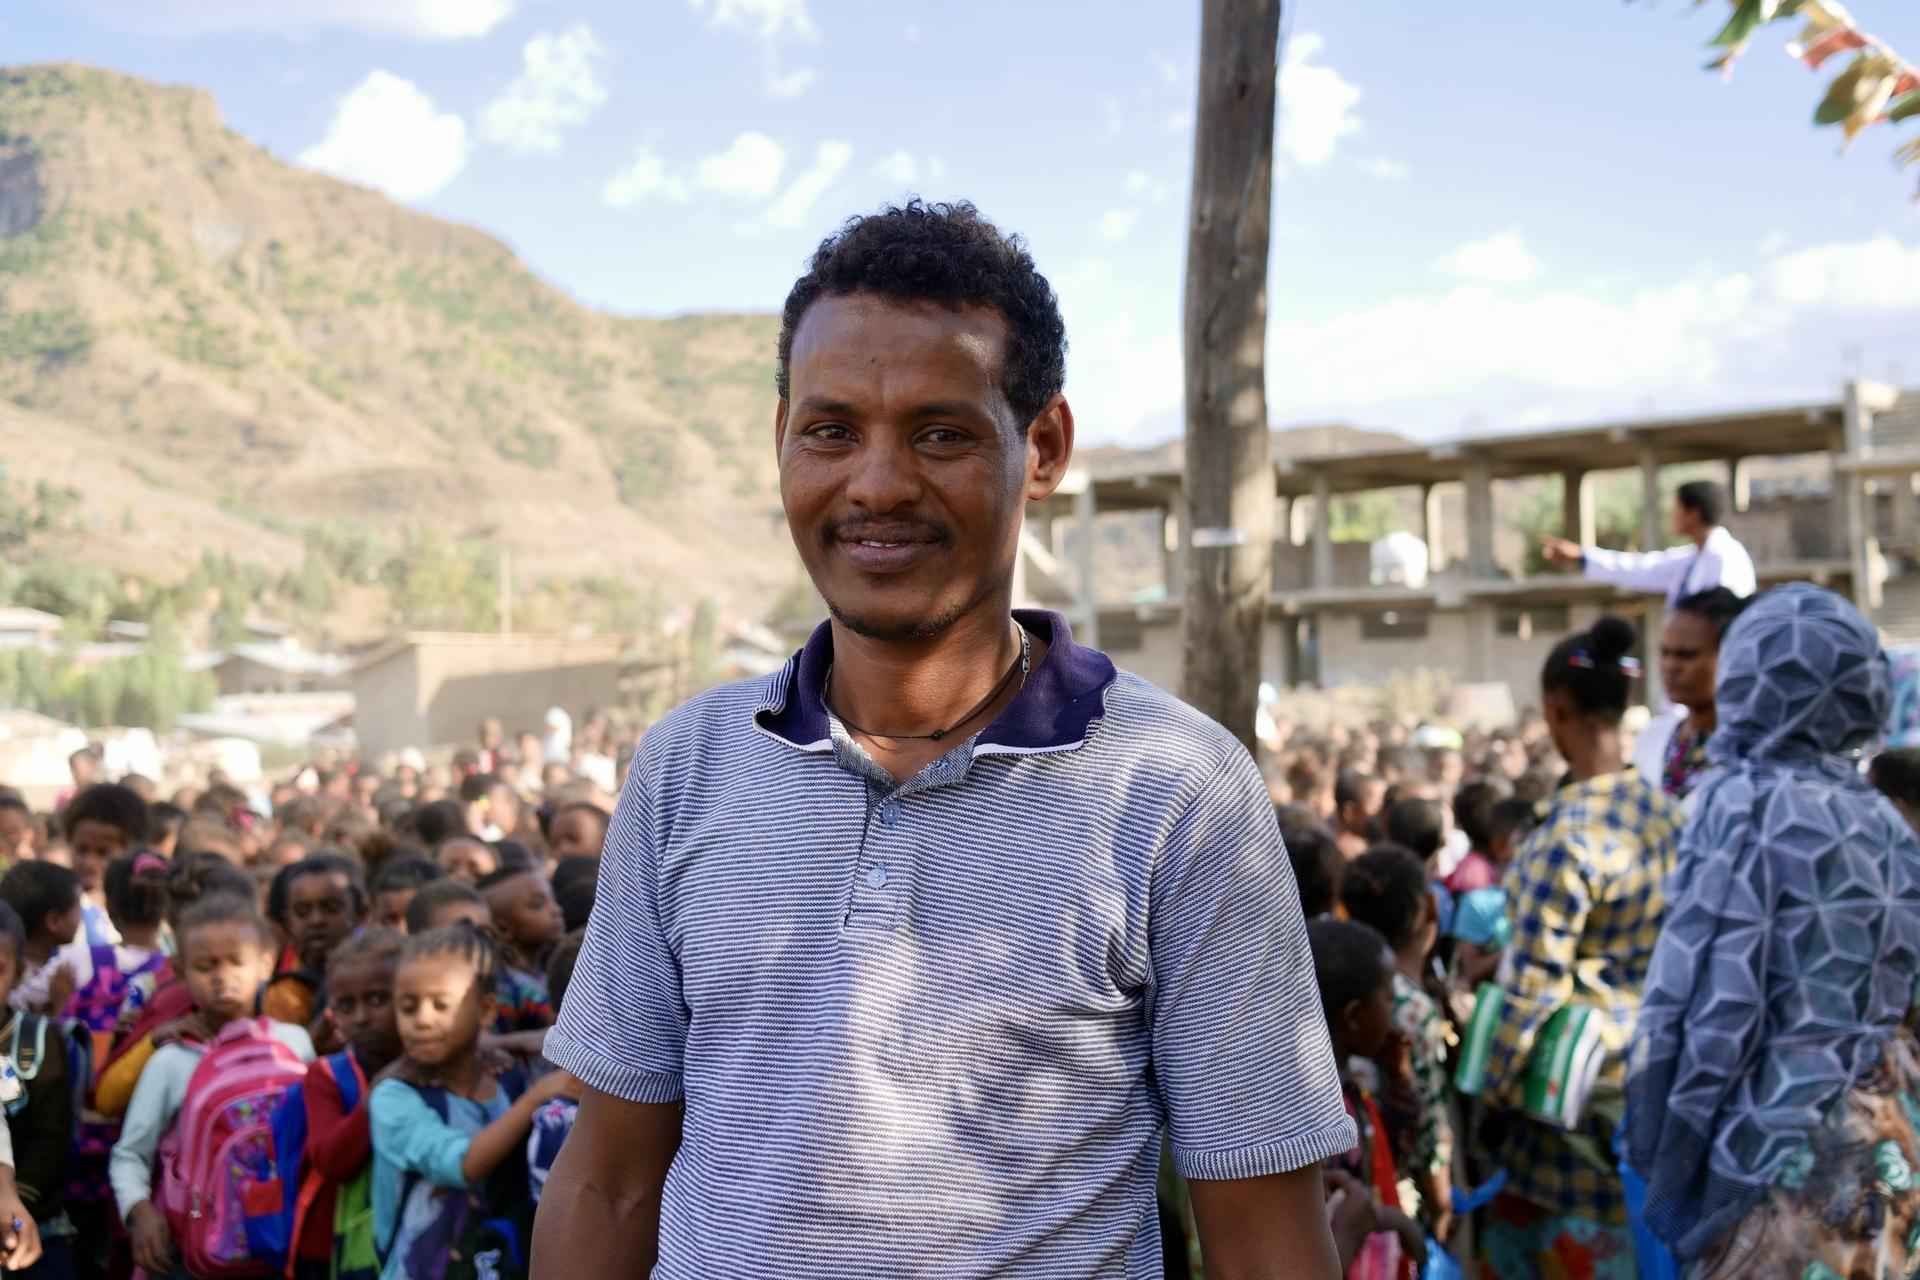 Principal Roda Sisay in front of a recently reopened school in Lalibela, Ethiopia, Feb. 15, 2022.